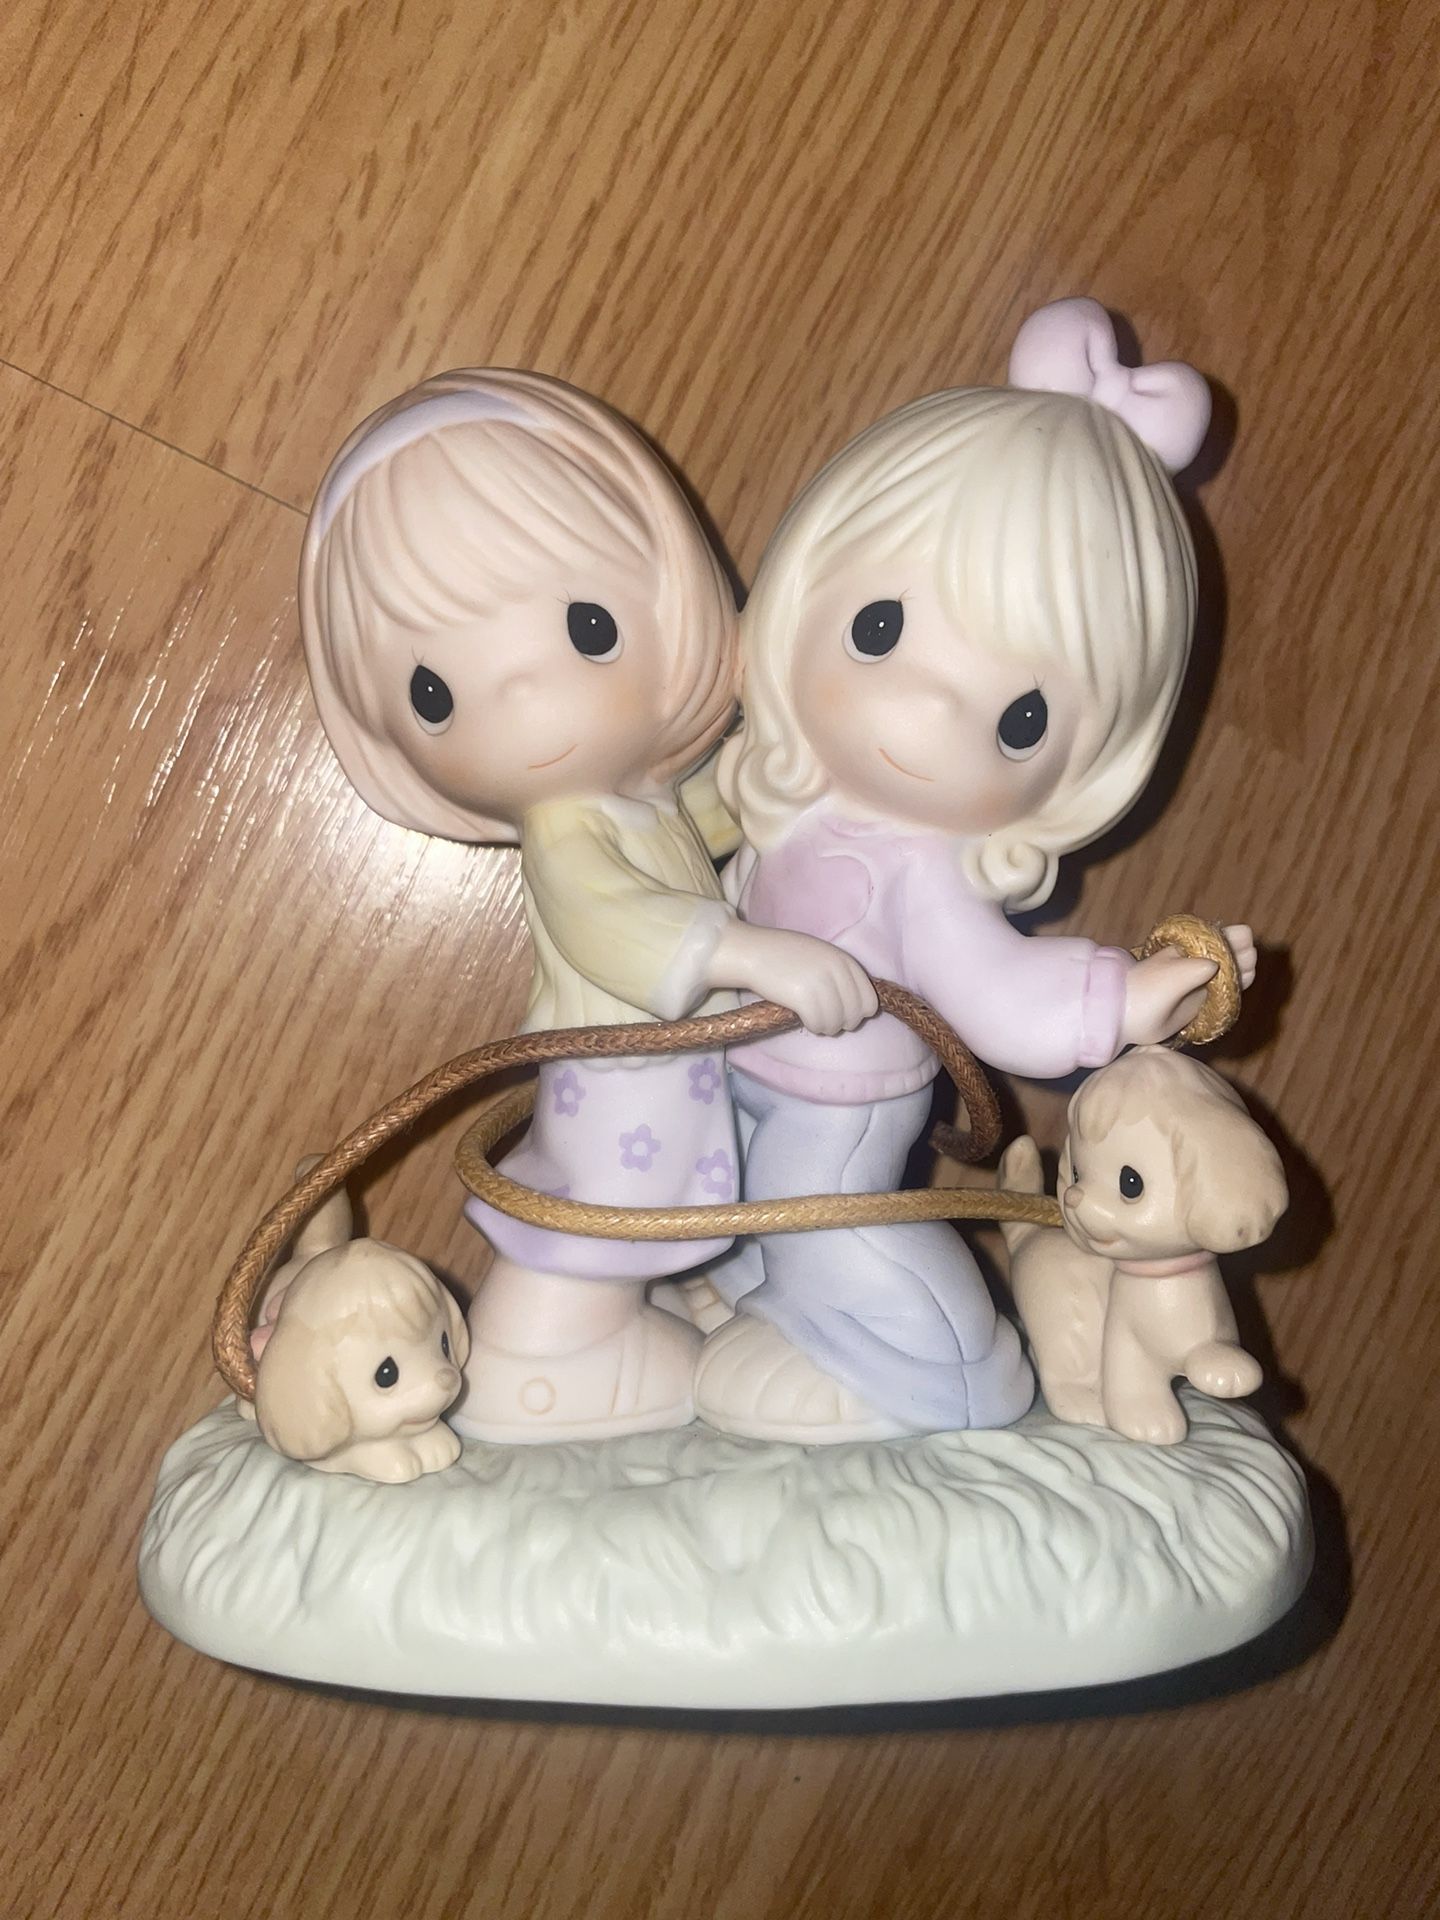 Precious Moments Figurine “Remember, We’re In It Together”